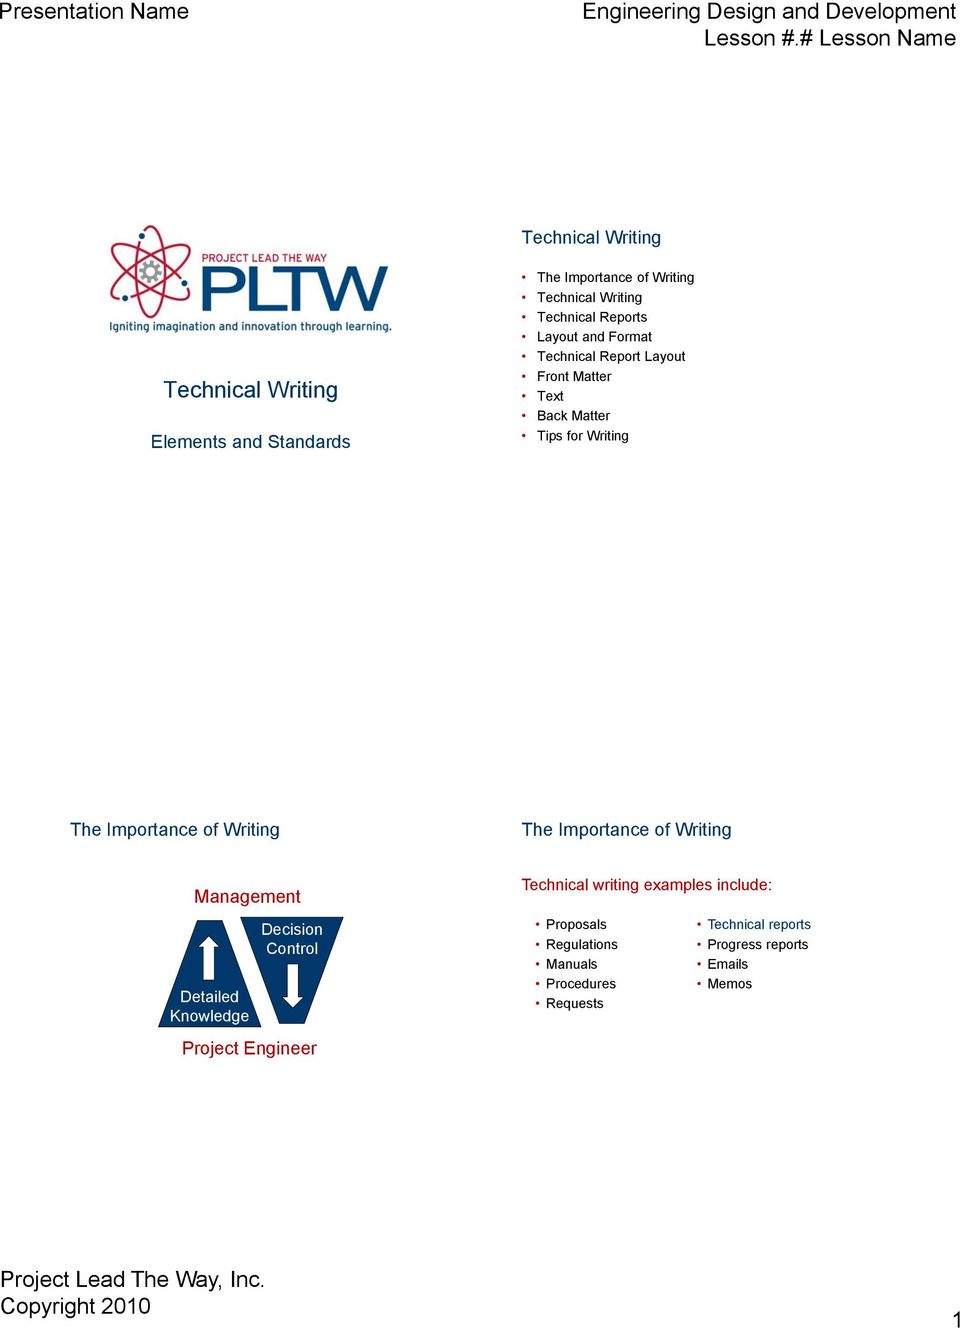 Importance of Writing Management Detailed Knowledge Decision Control Project Engineer Technical writing